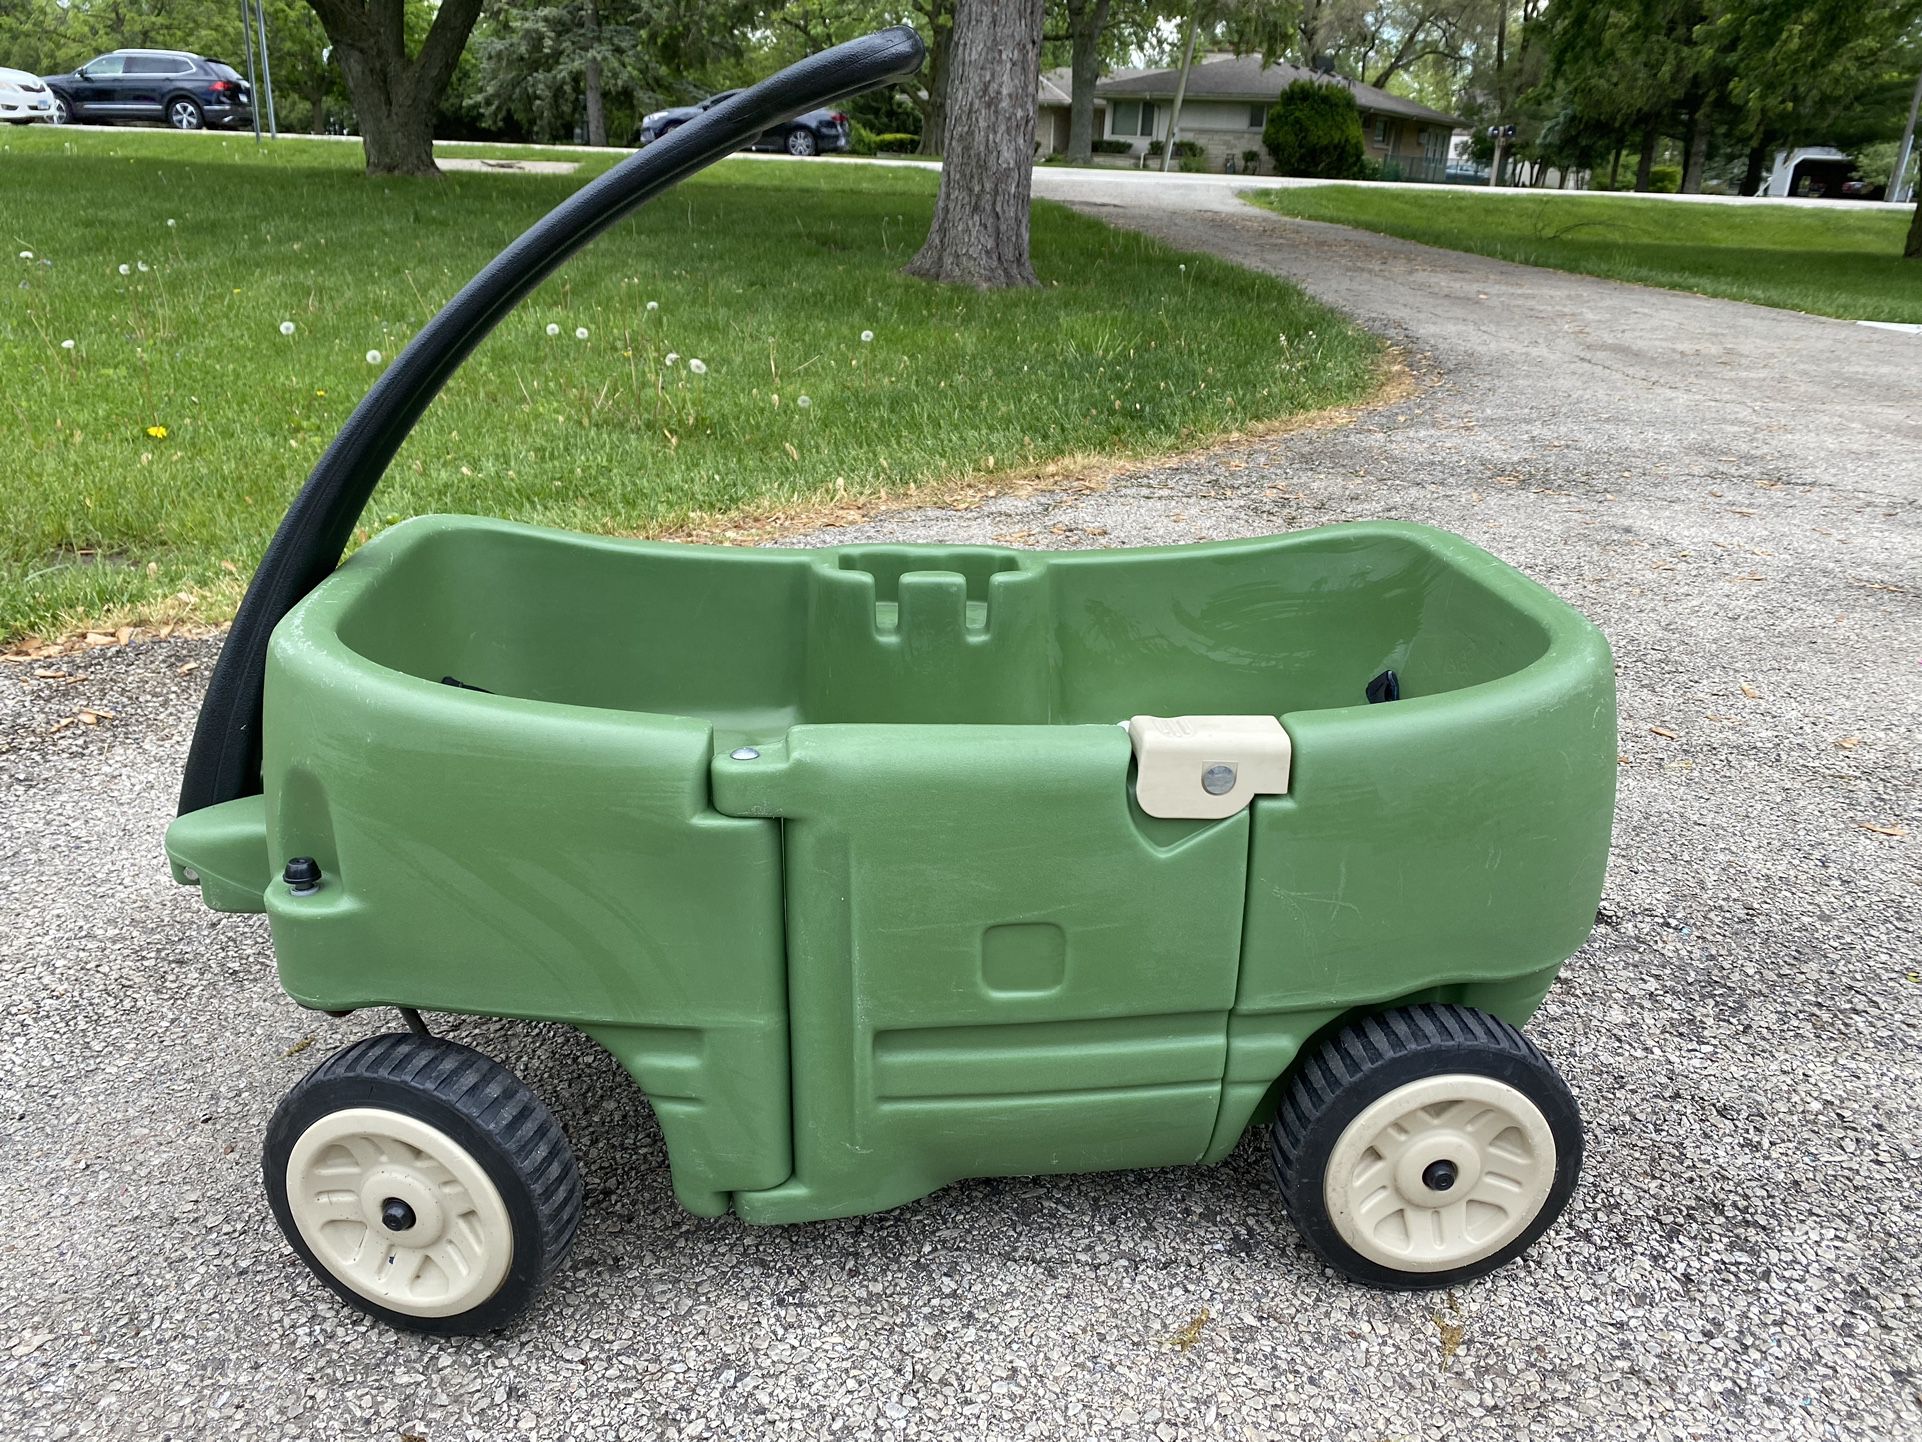 Green kids Step2 wagon for 2 used-normal cosmetic wear